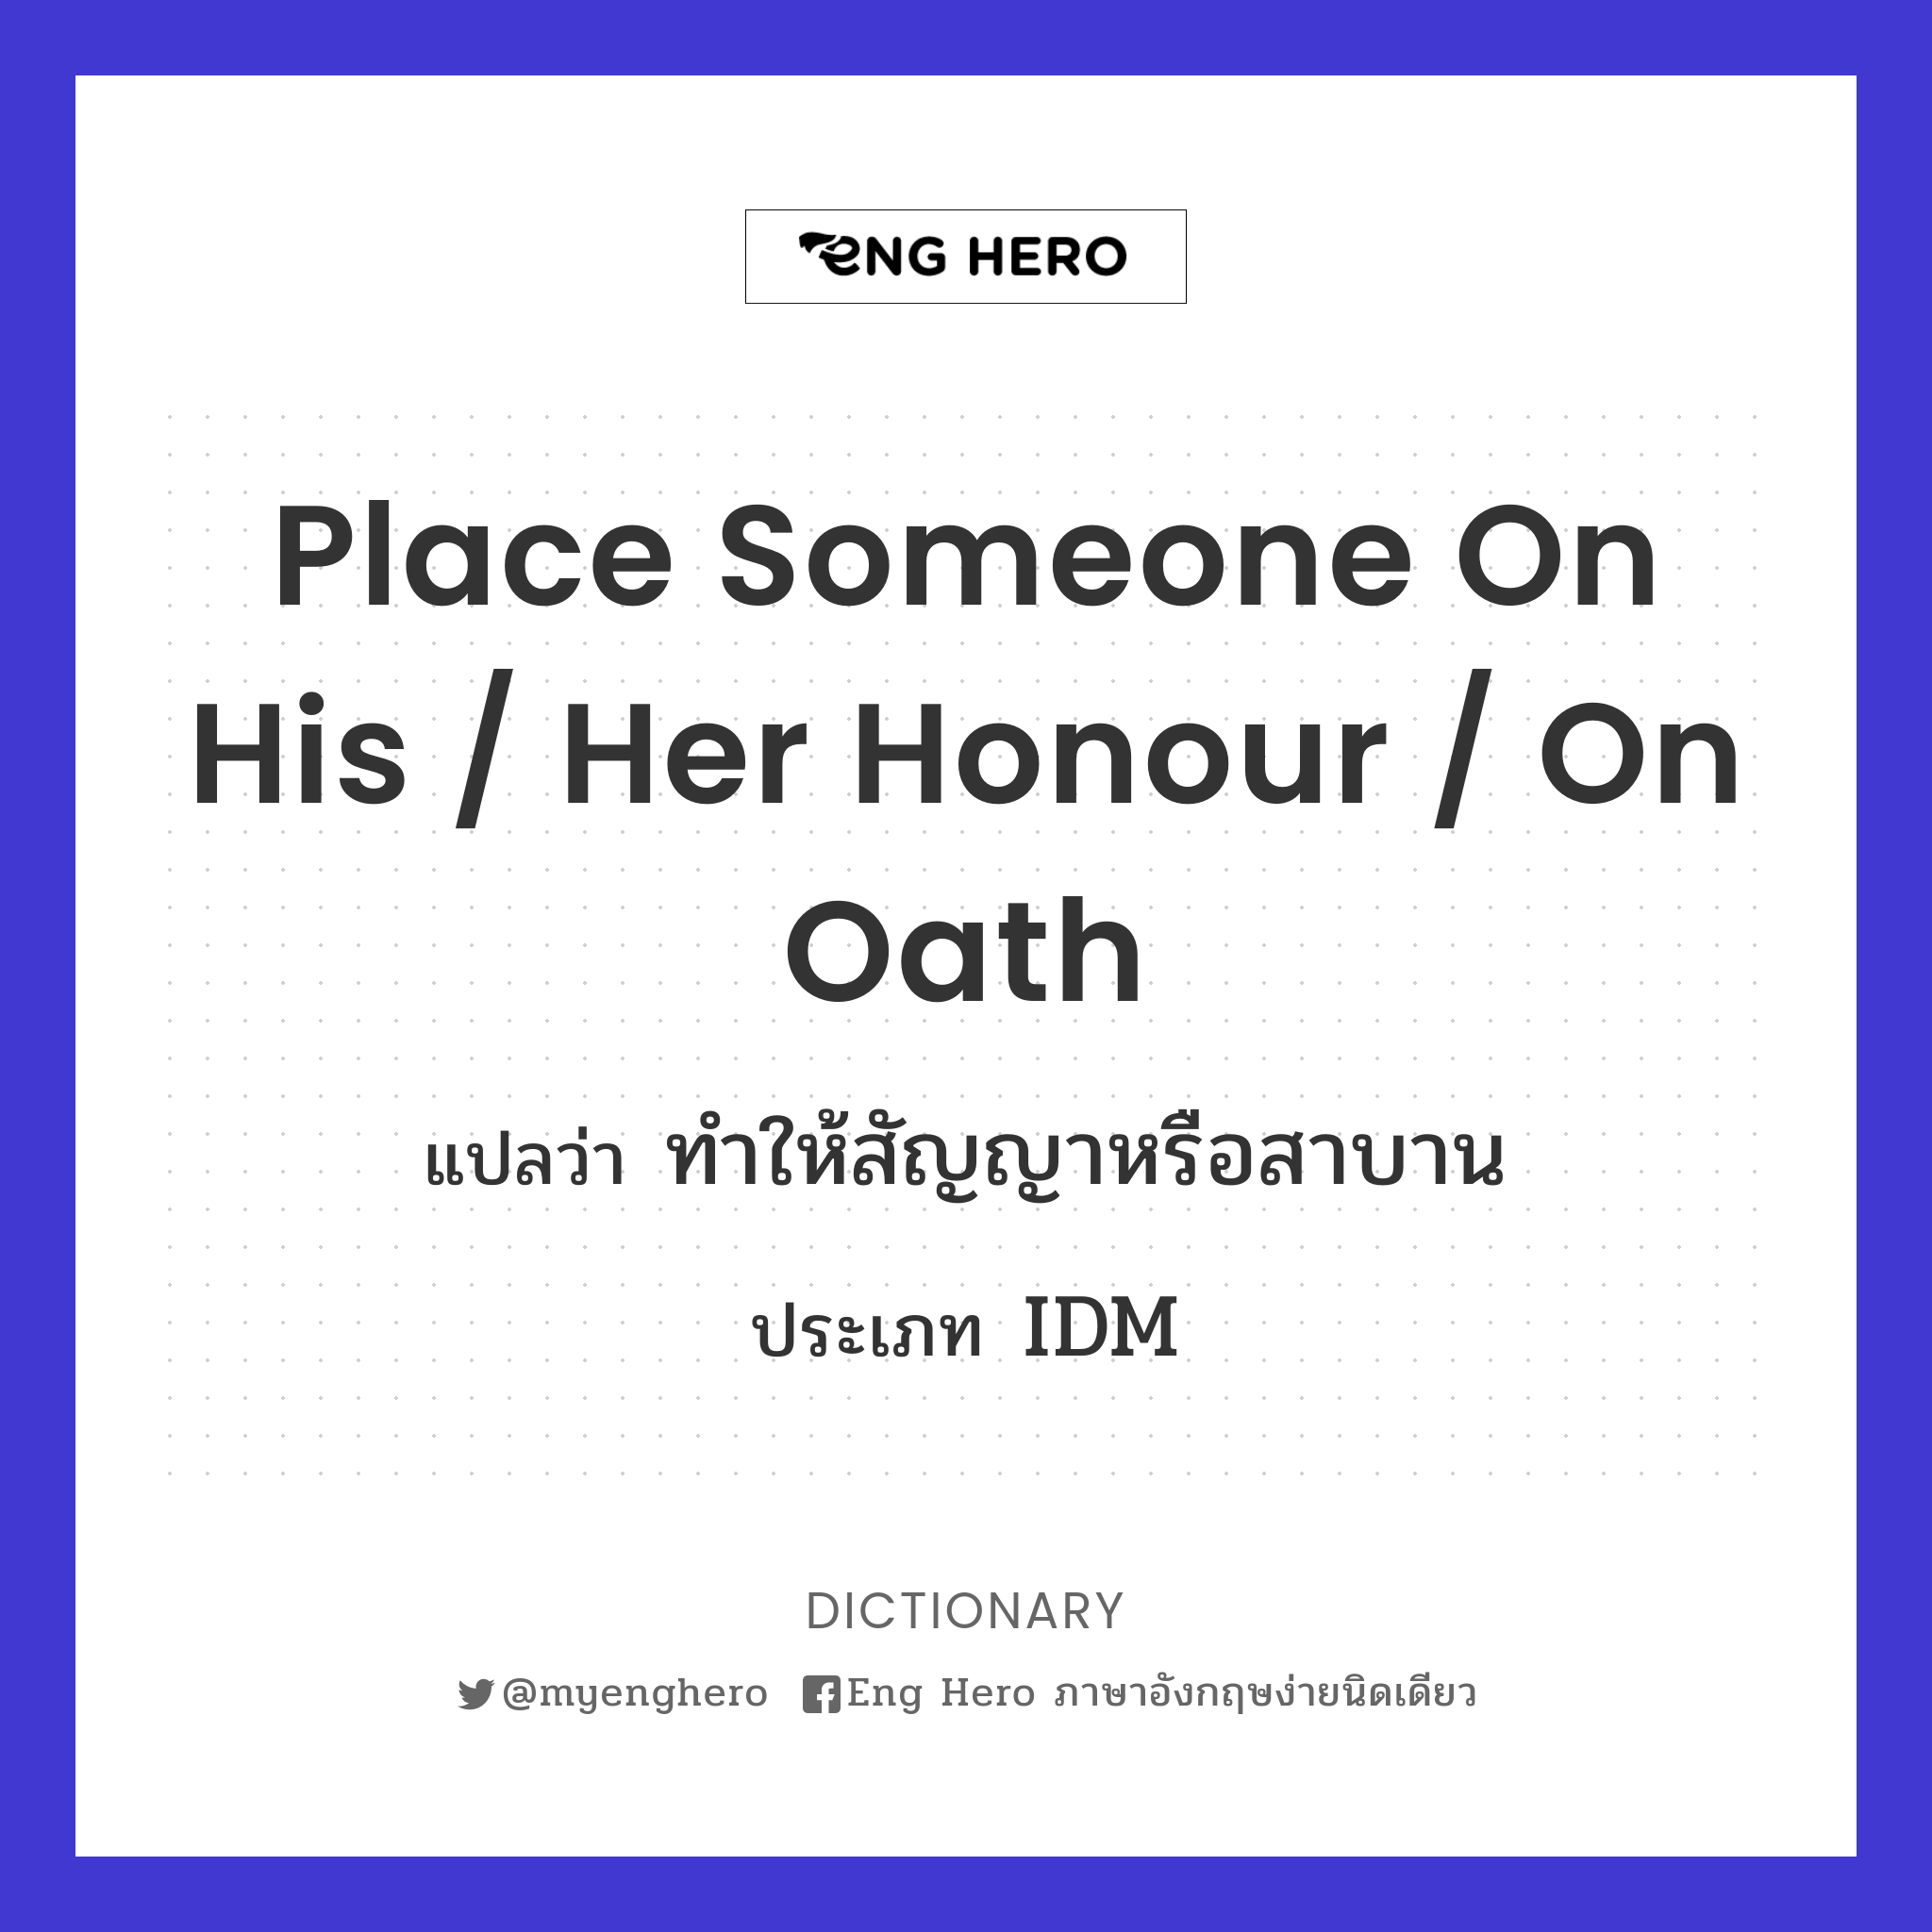 place someone on his / her honour / on oath